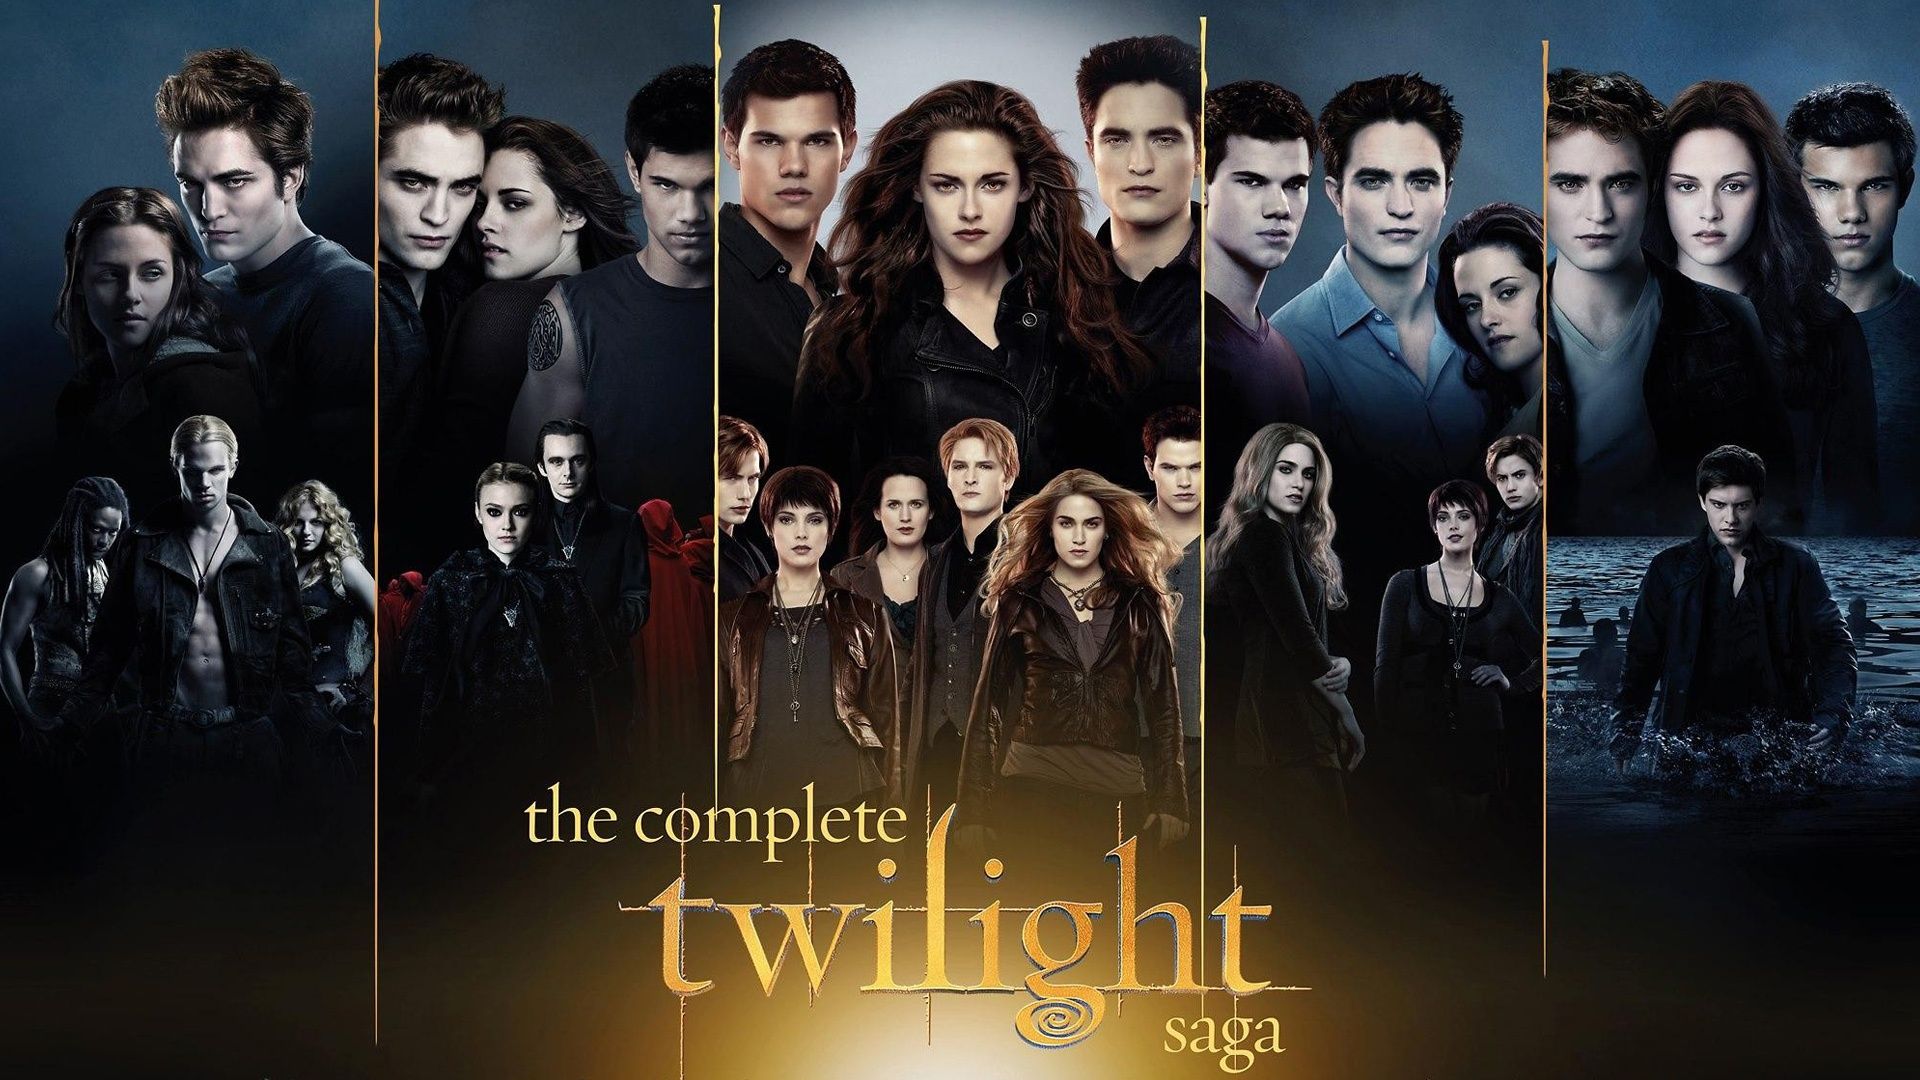 The Complete Twilight Saga Wallpapers | HD Wallpapers